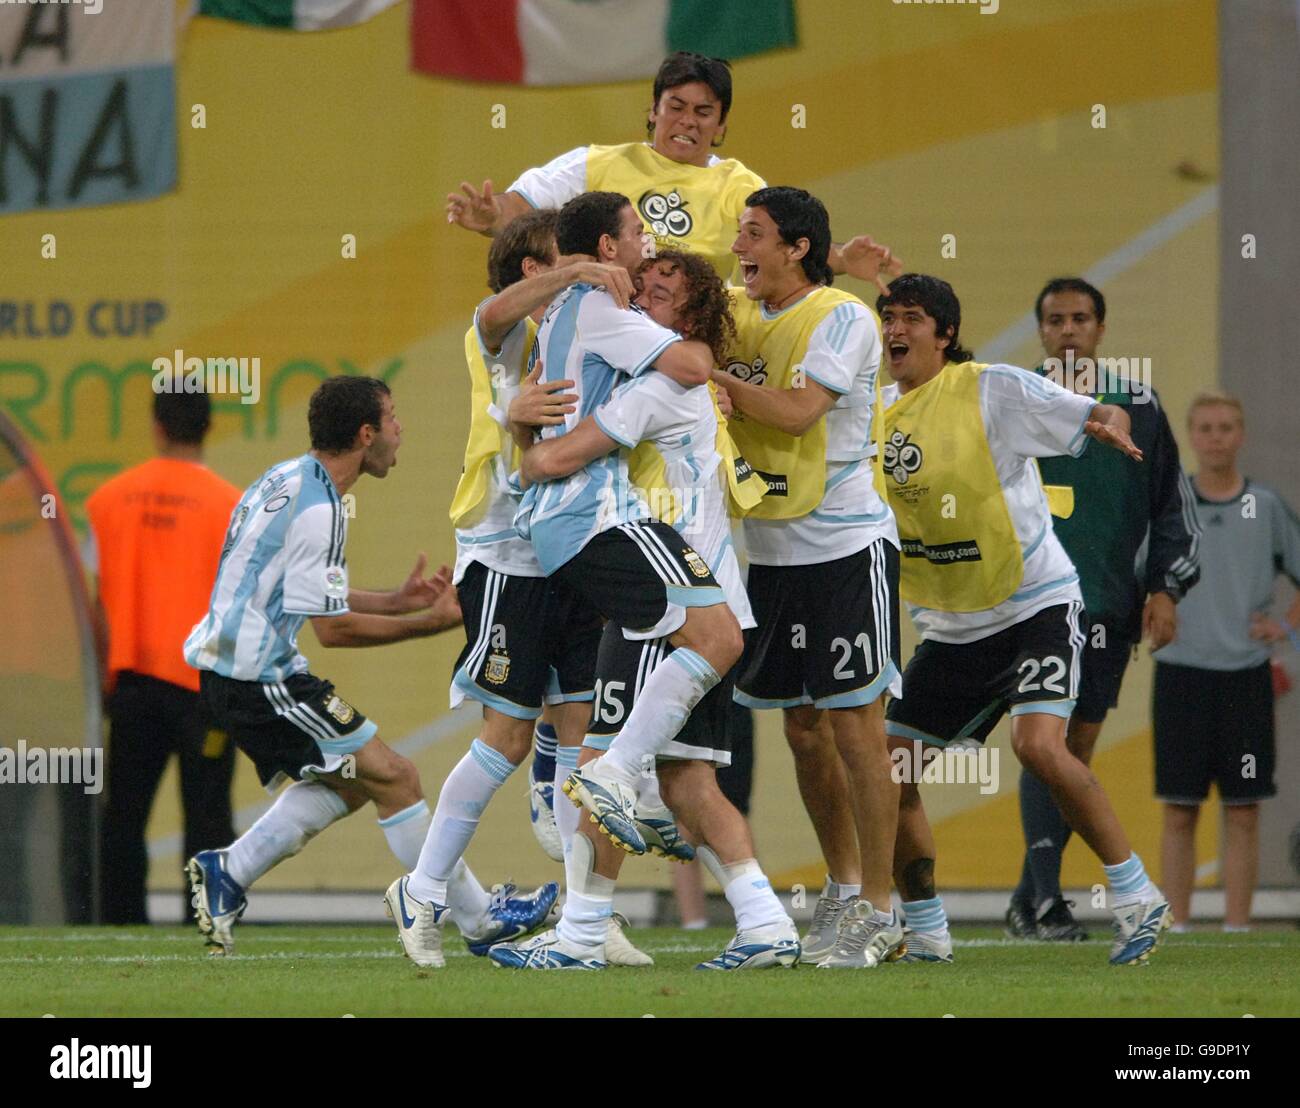 Soccer - 2006 FIFA World Cup Germany - Second Round - Argentina v Mexico - Zentralstadion. Argentina players celebrate a goal by Maxi Rodriguez (c) Stock Photo